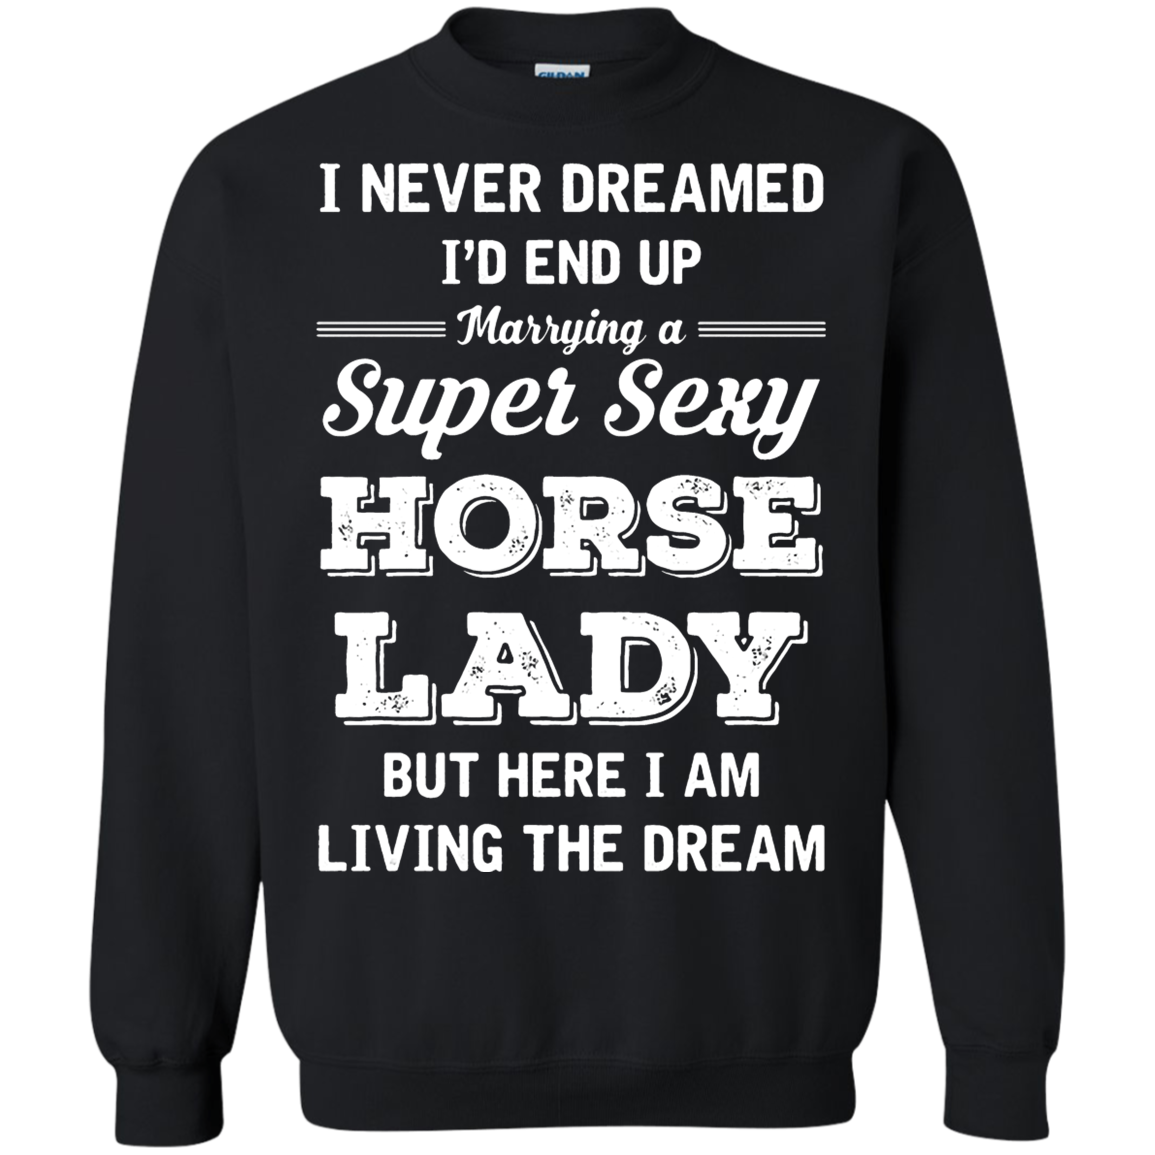 Marry A Super Sexy Horse Lady 